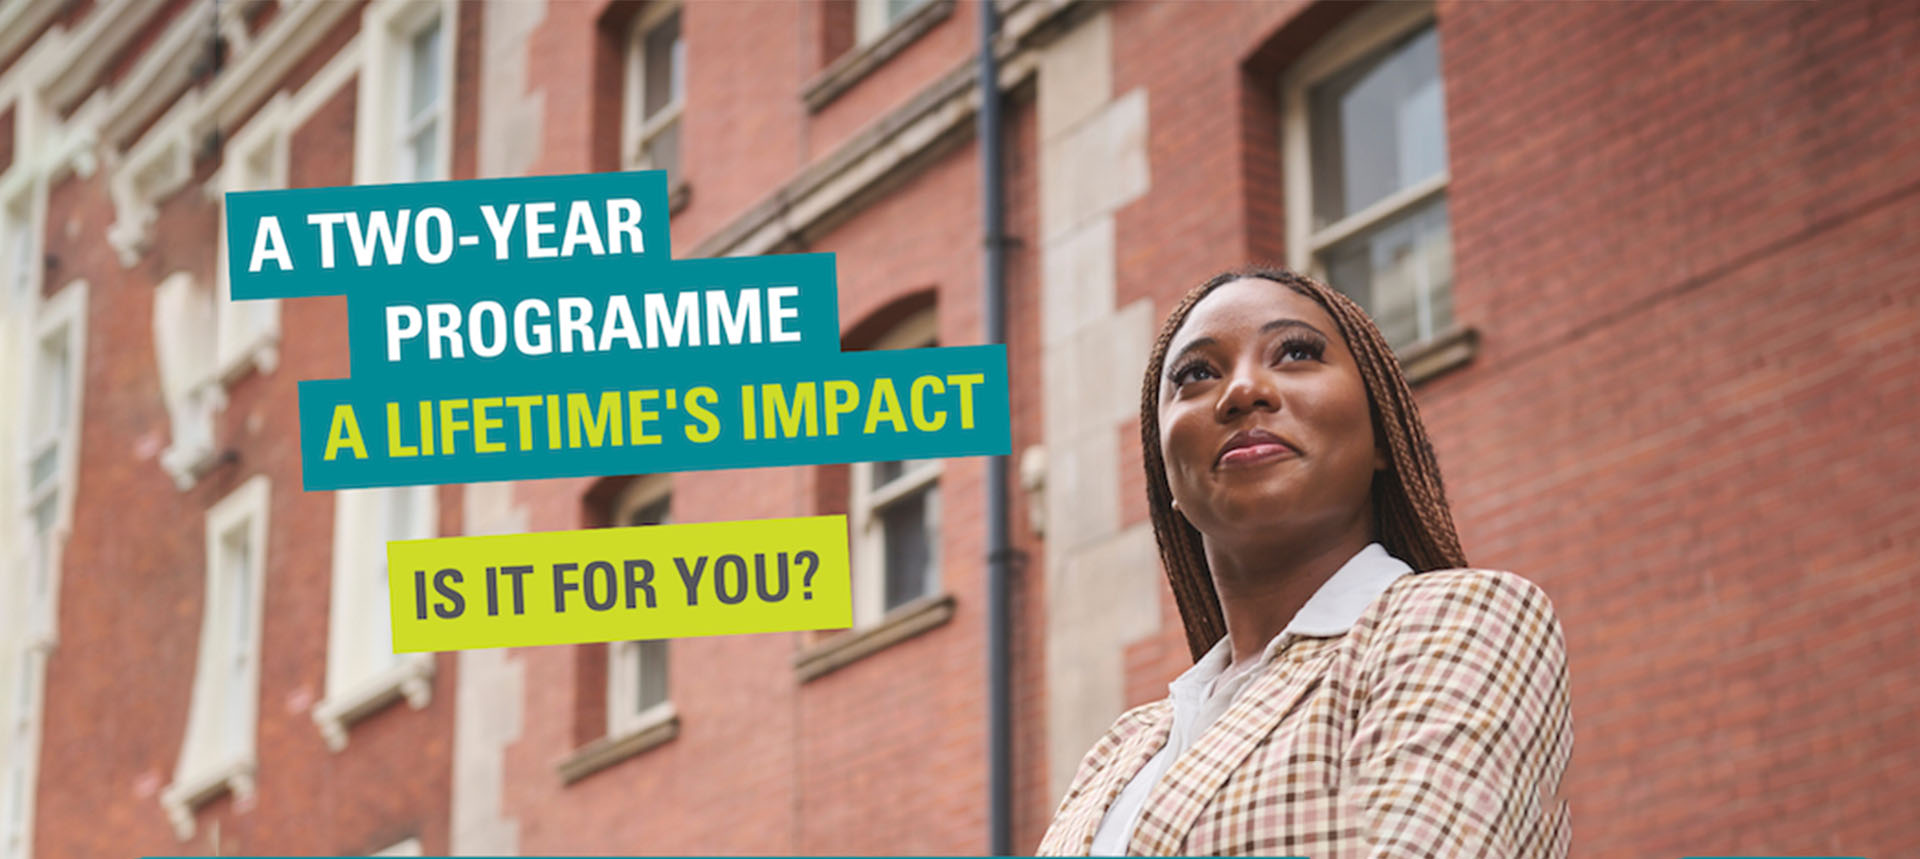 A woman looks confidently towards the sky. Text on the image says "A 2 year programme. A lifetime's impact. Is it for you?"